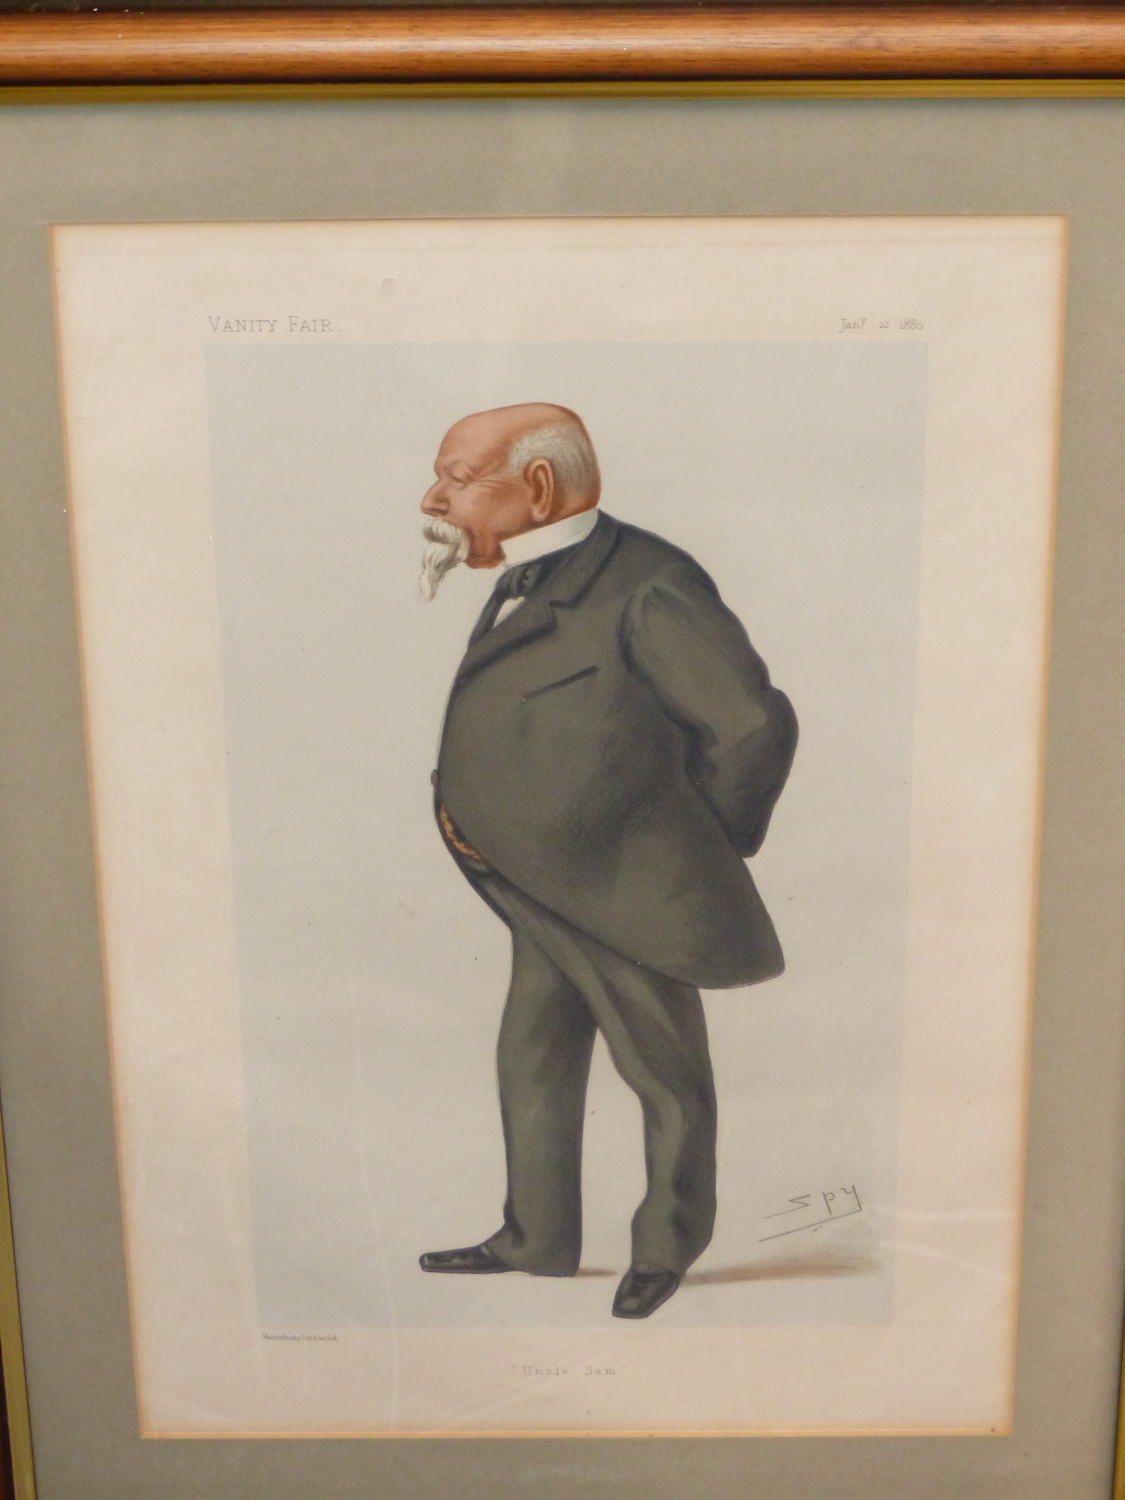 TEN VANITY FAIR PRINTS, MOSTLY SPY AND APE; UNCLE SAM, STATESMEN NO.87, MEN OF THE DAY NO. 1, AN OLD - Image 2 of 11